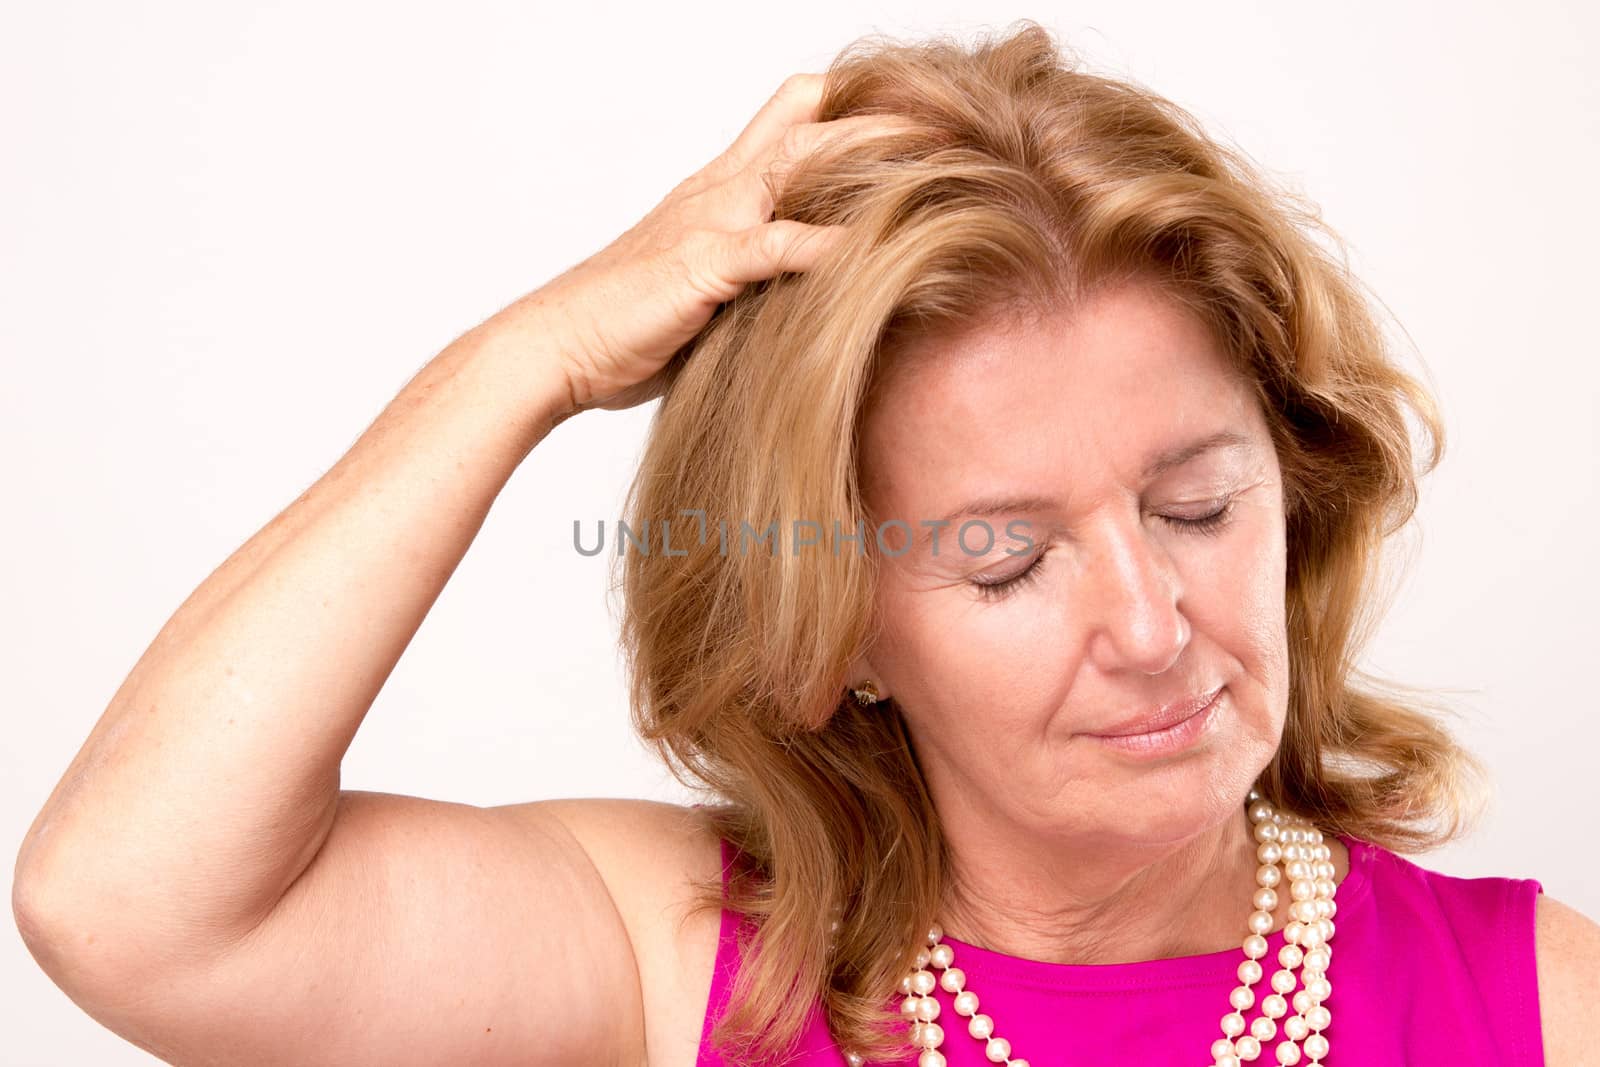 Attractive middle aged woman with a headache clutching her hand to the top of her head with downcast eyes and a serious pained expression, isolated on white